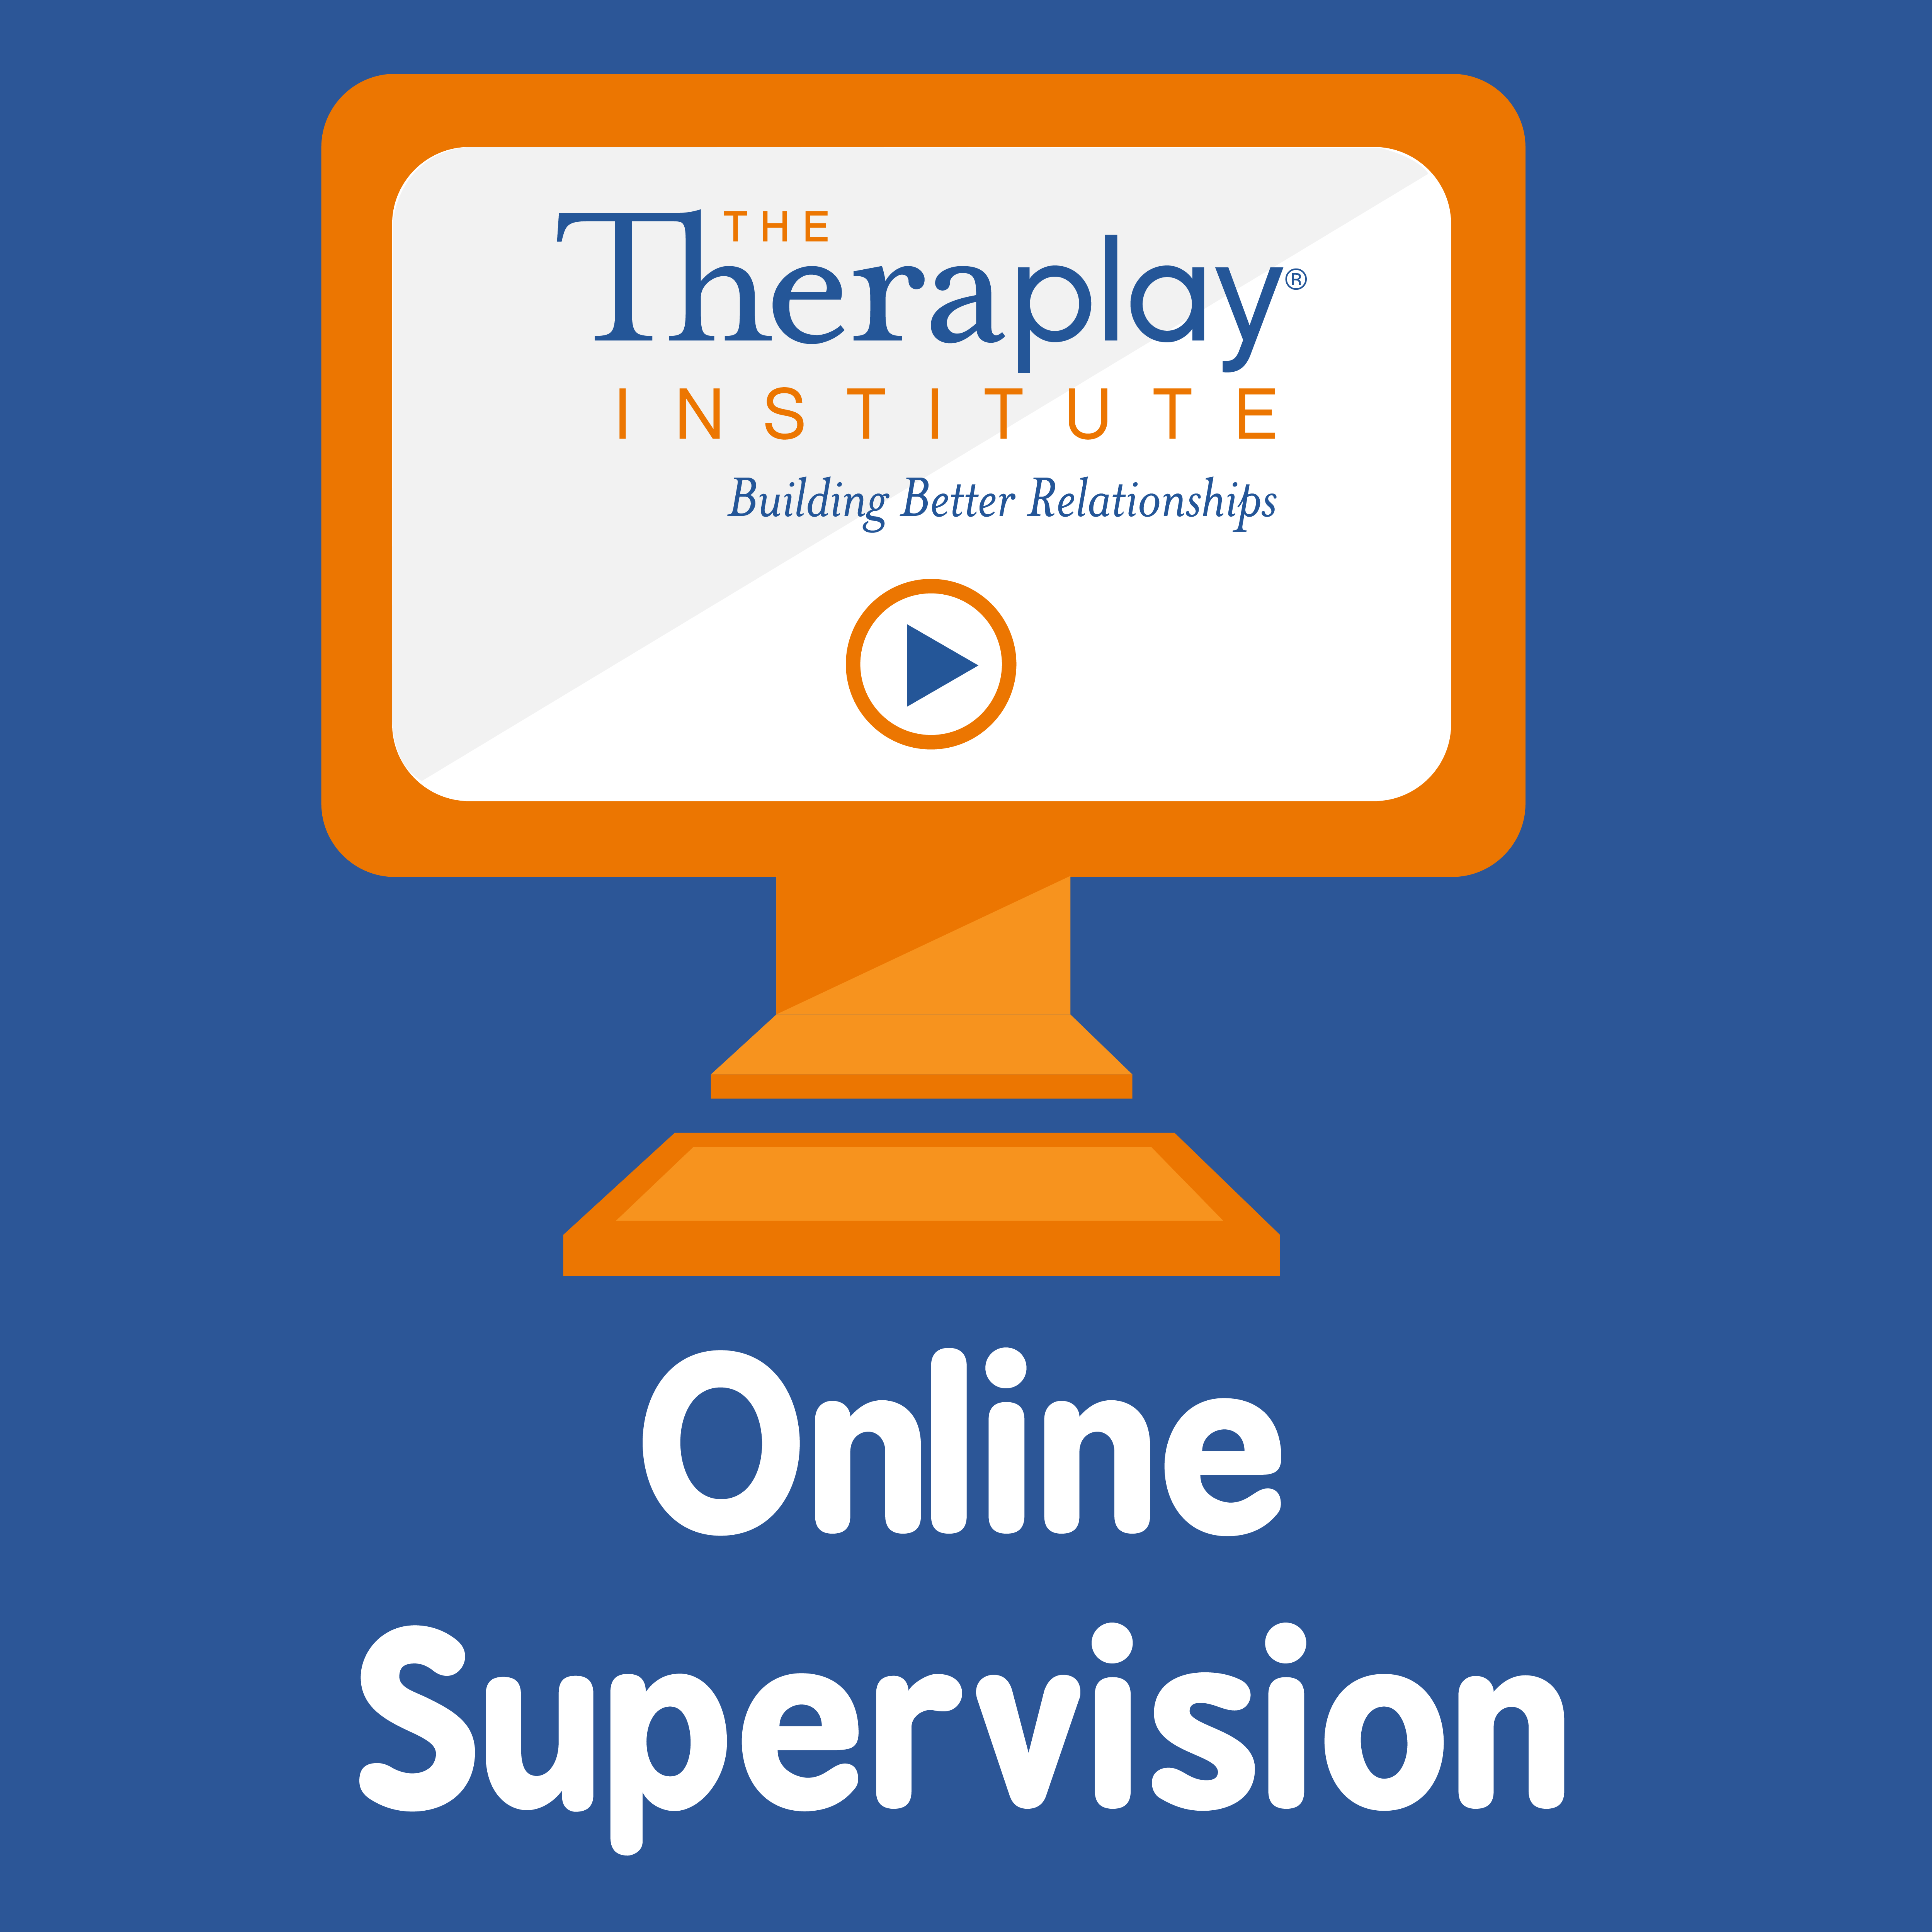 Web Supervision | July 21, 2022